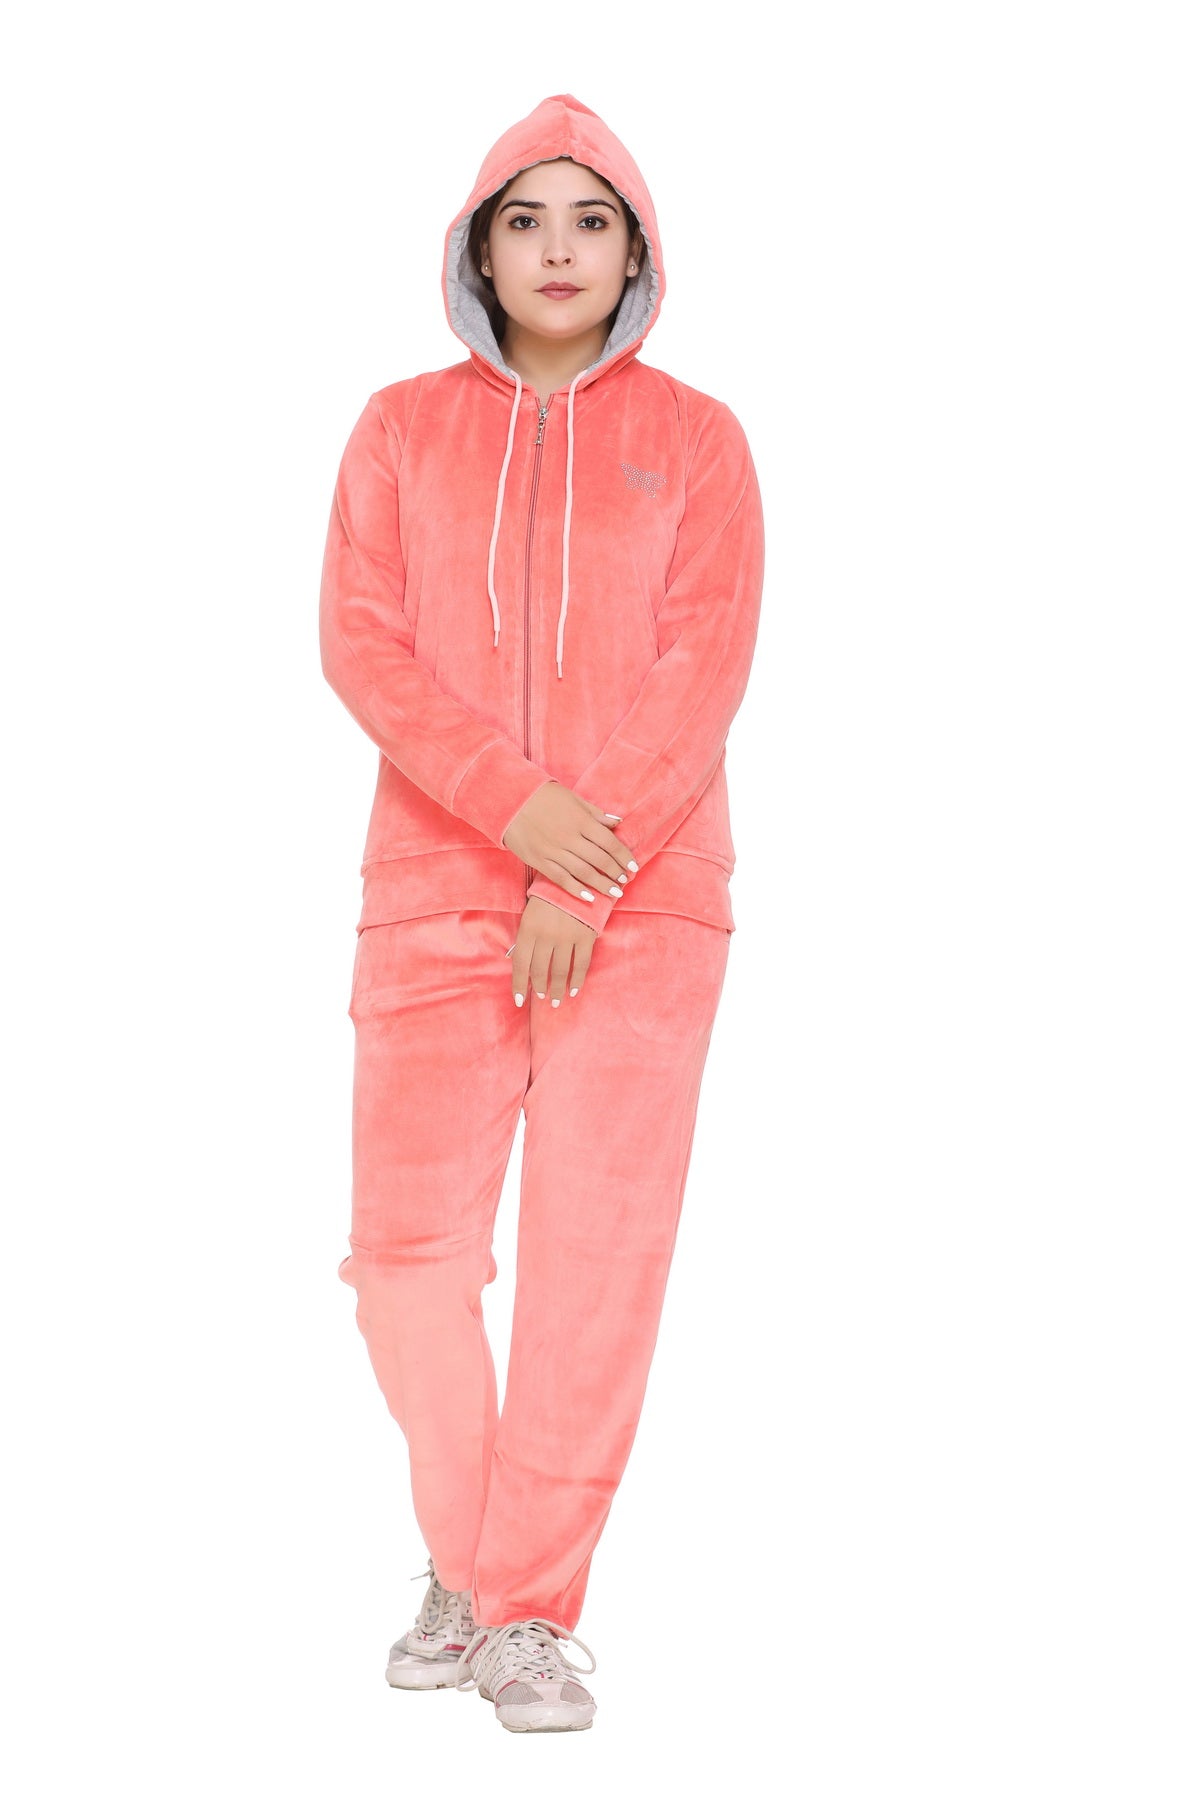 CUPID  Women Winter Wear Cotton Velvet Track Suit/Night Suit (Blush Pink) freeshipping - Cupid Clothings